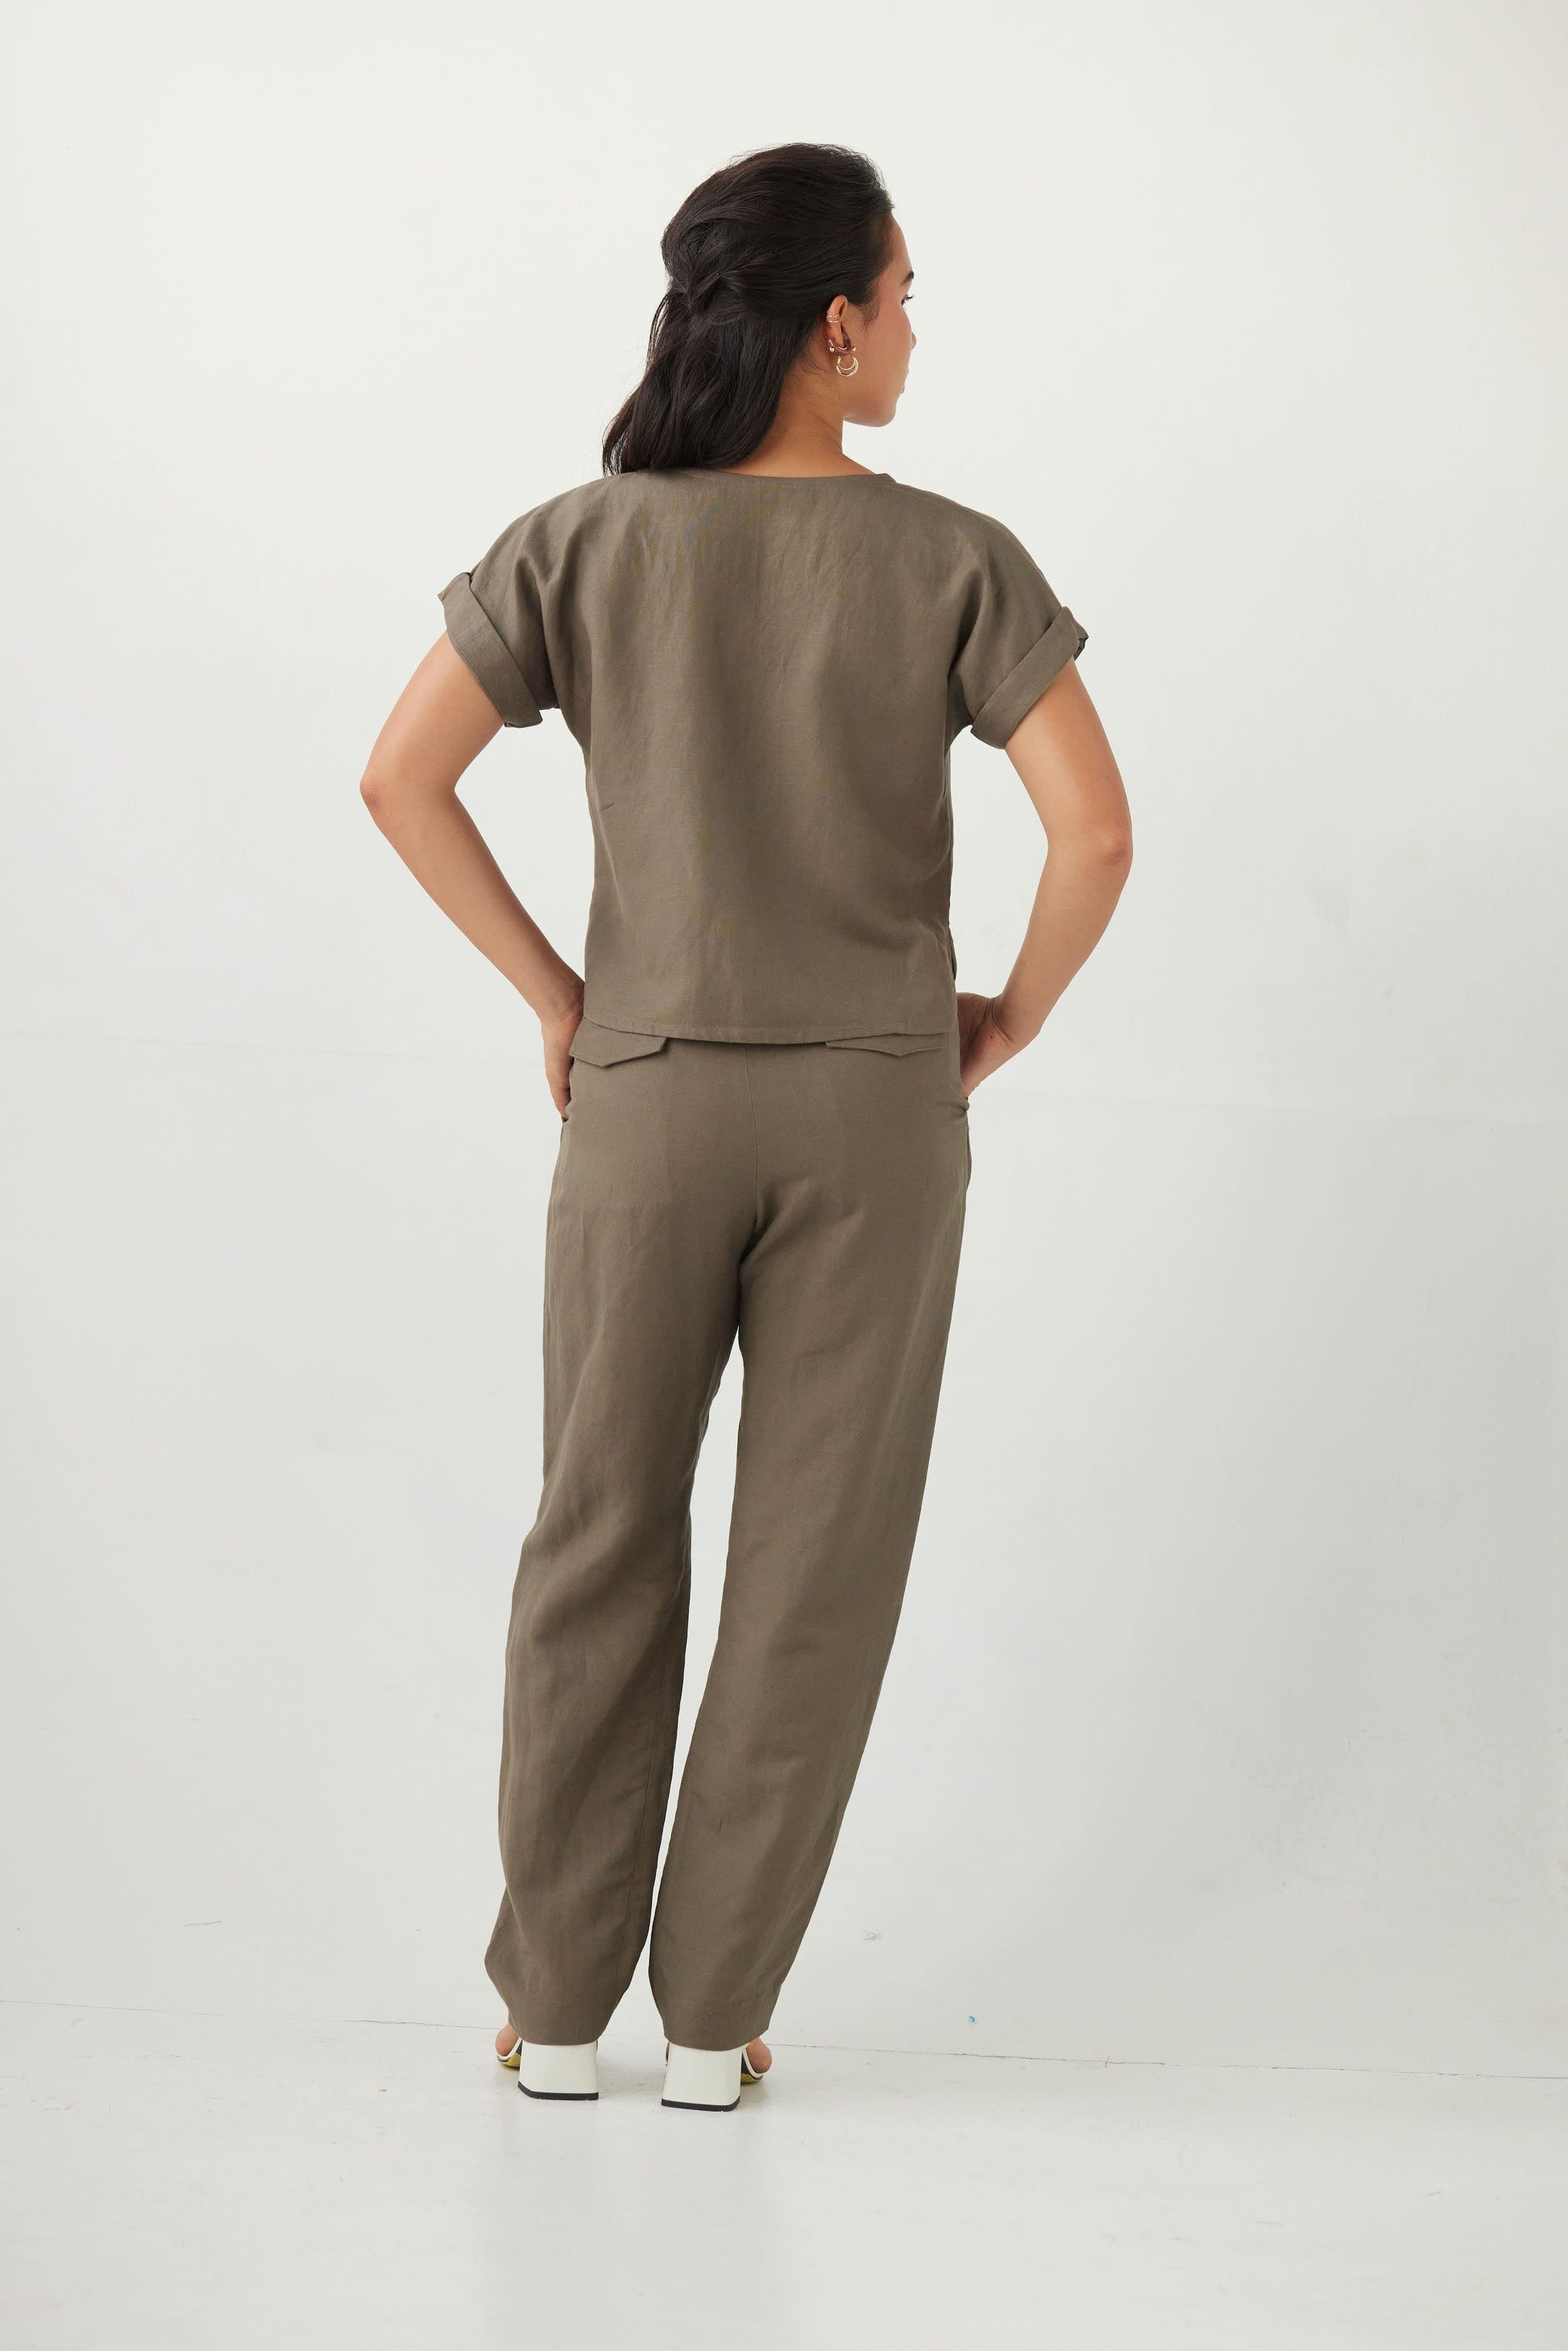 Sophia Pant in Linen Blend Pants CHRISTINE ALCALAY   